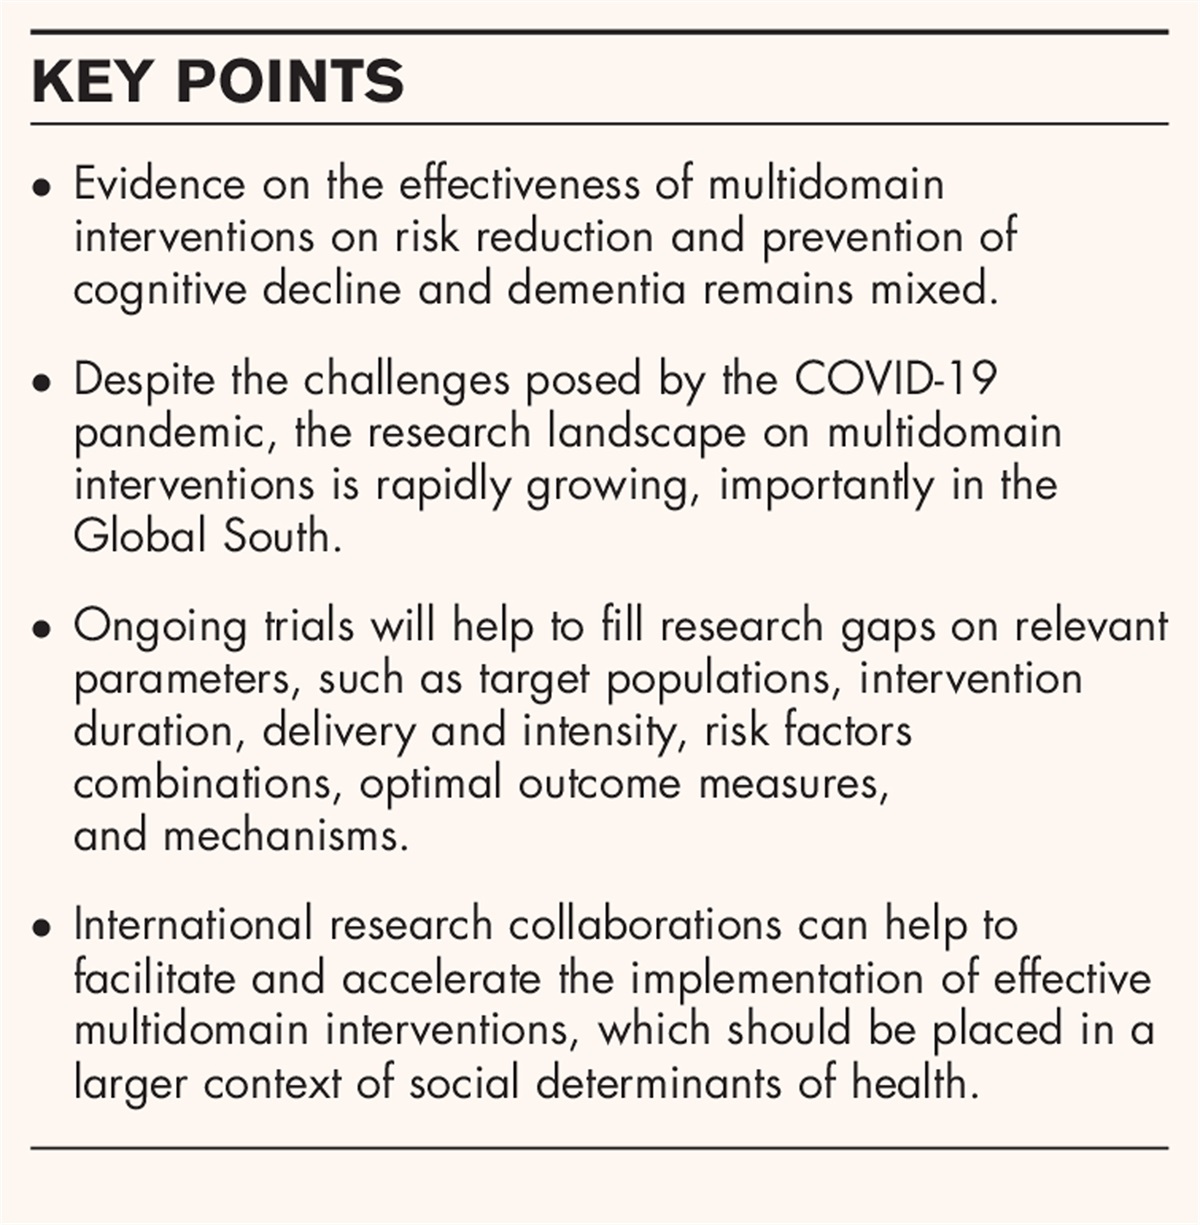 Multidomain interventions for risk reduction and prevention of cognitive decline and dementia: current developments